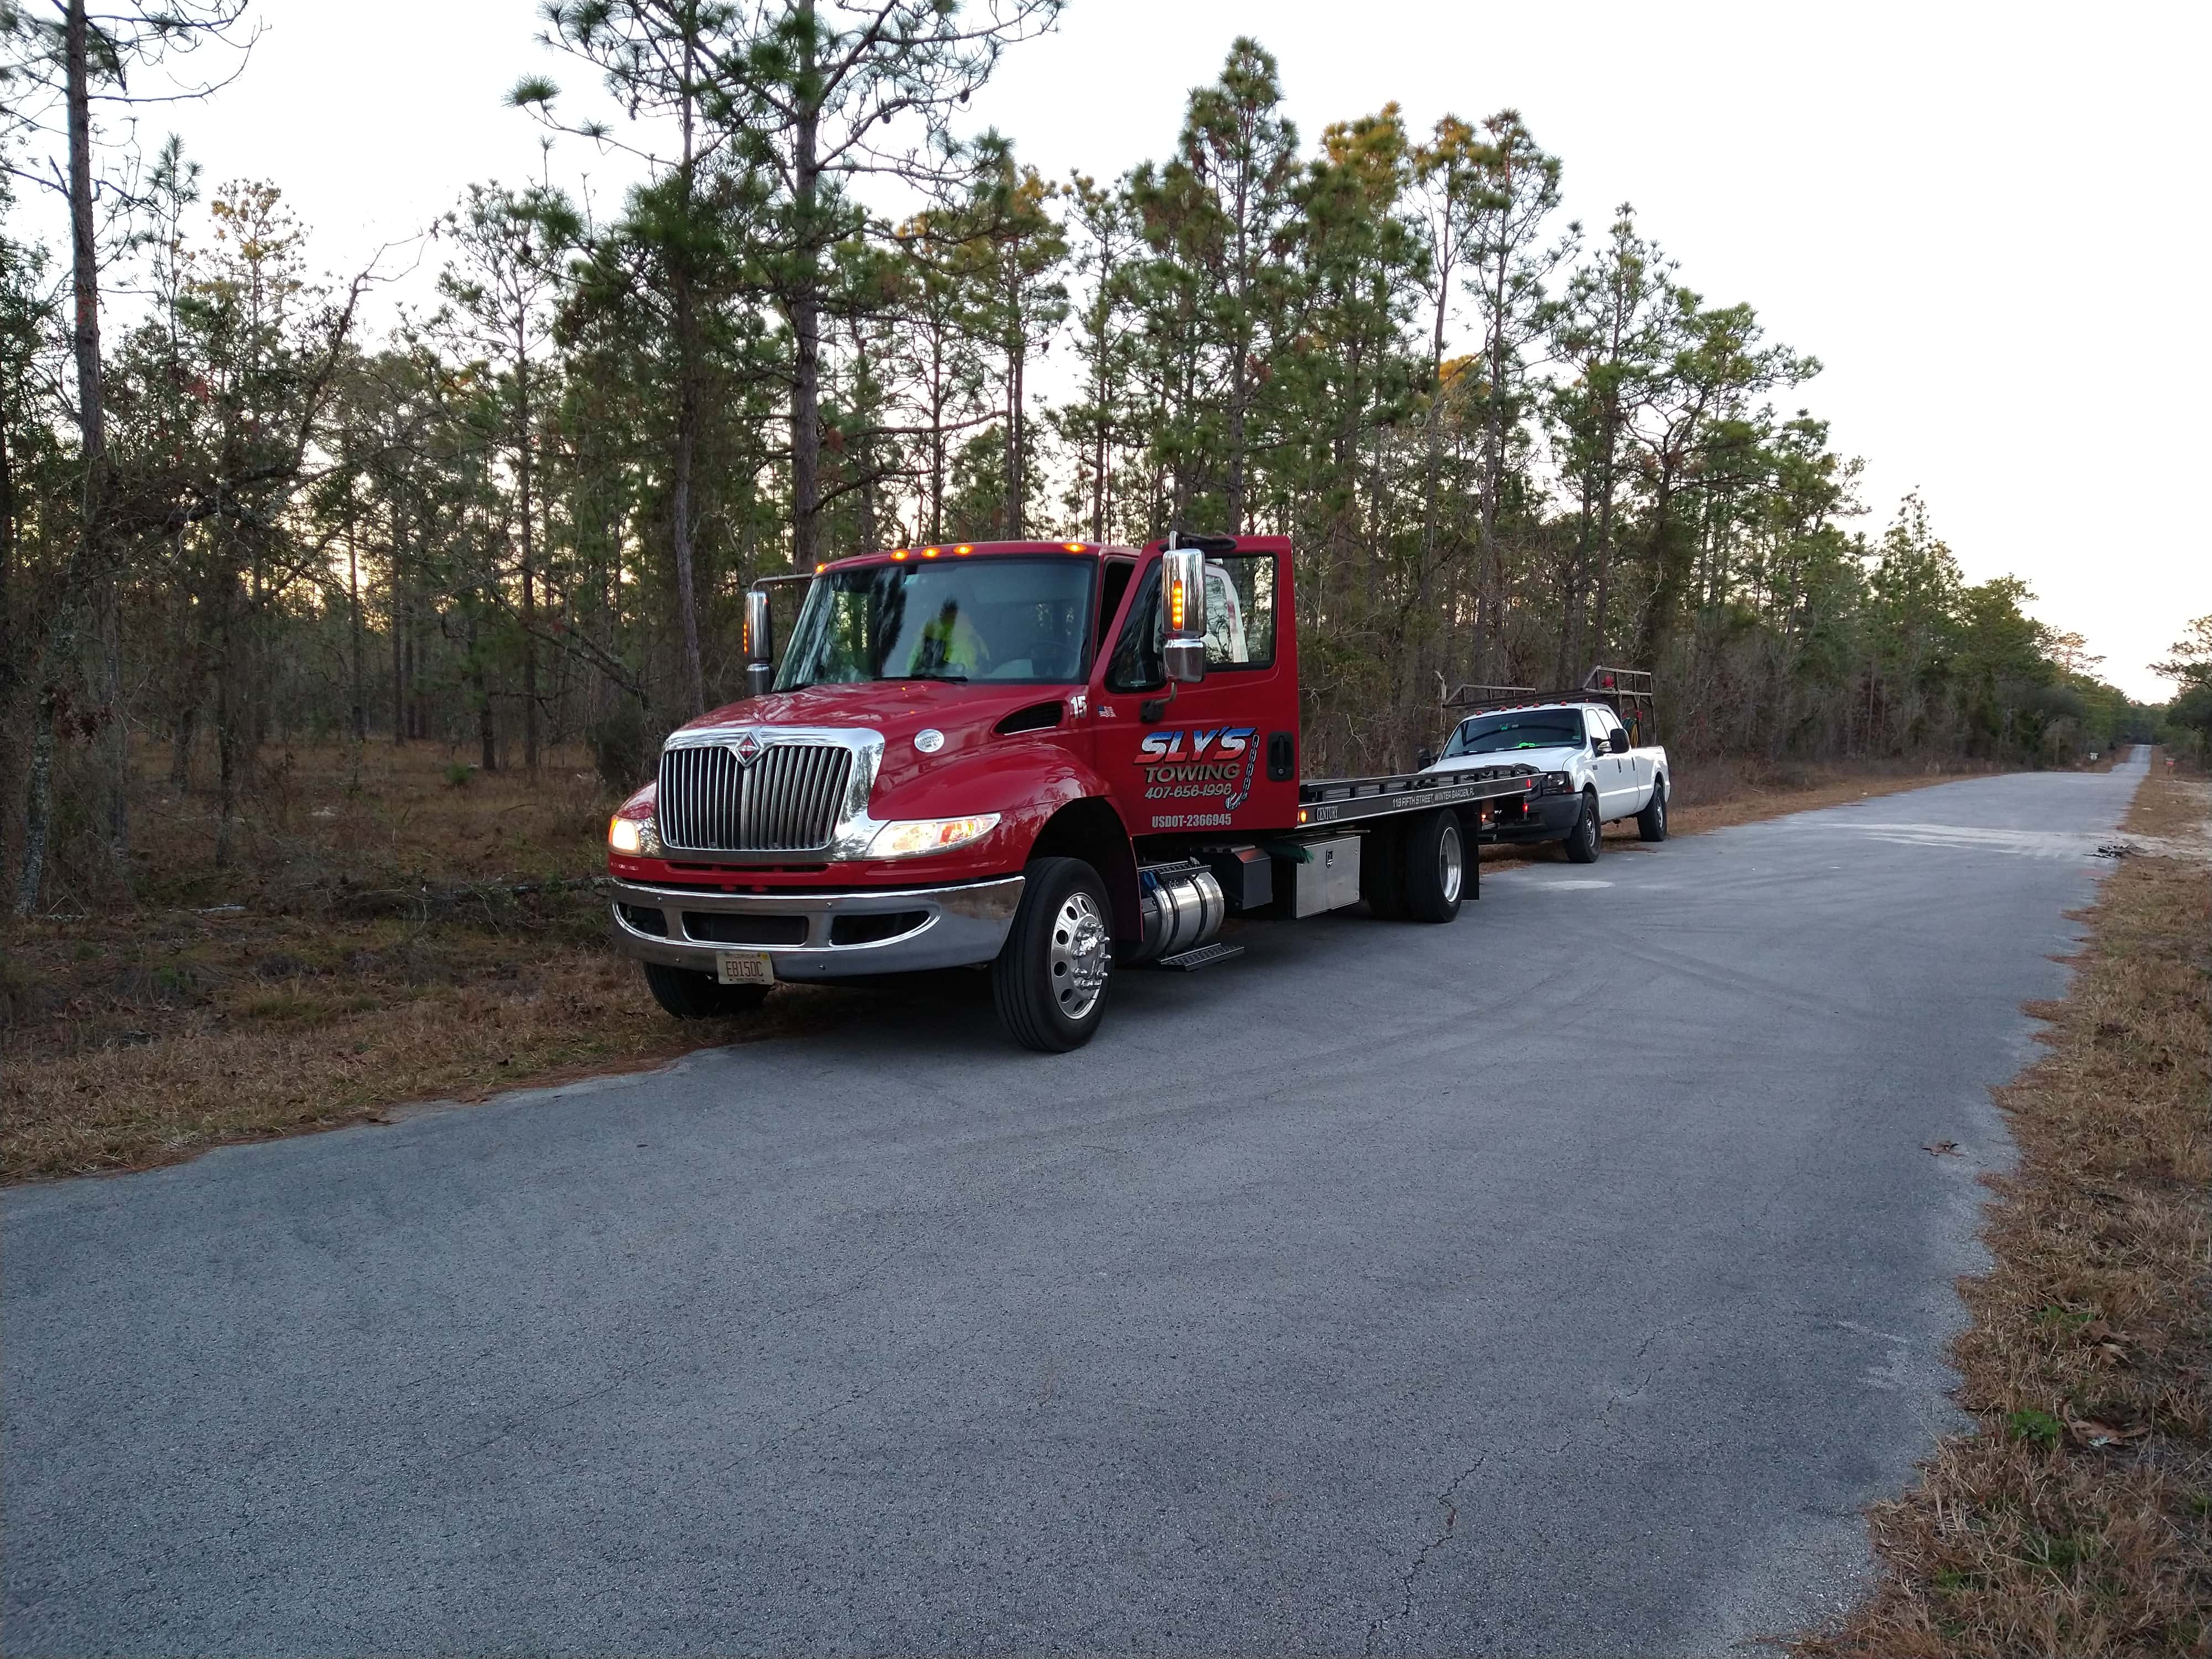 Sly's Towing & Recovery, LLC - Winter Garden, FL, US, 24 hour roadside assistance near me